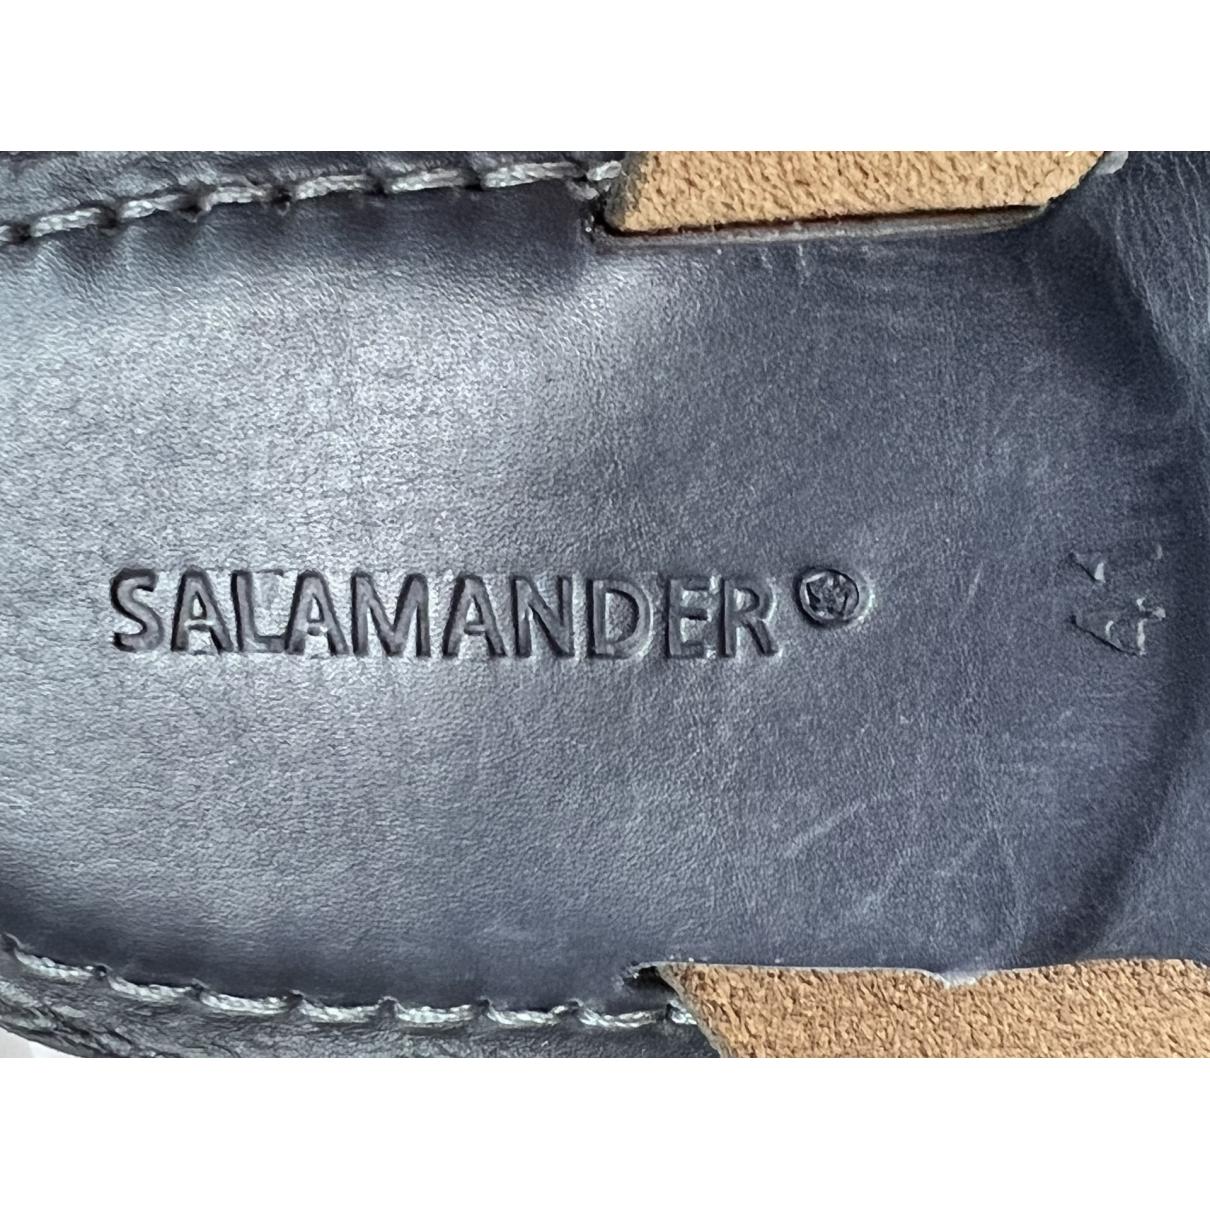 Leather sandals SALAMANDER Navy size 41 EU in Leather - 22557086